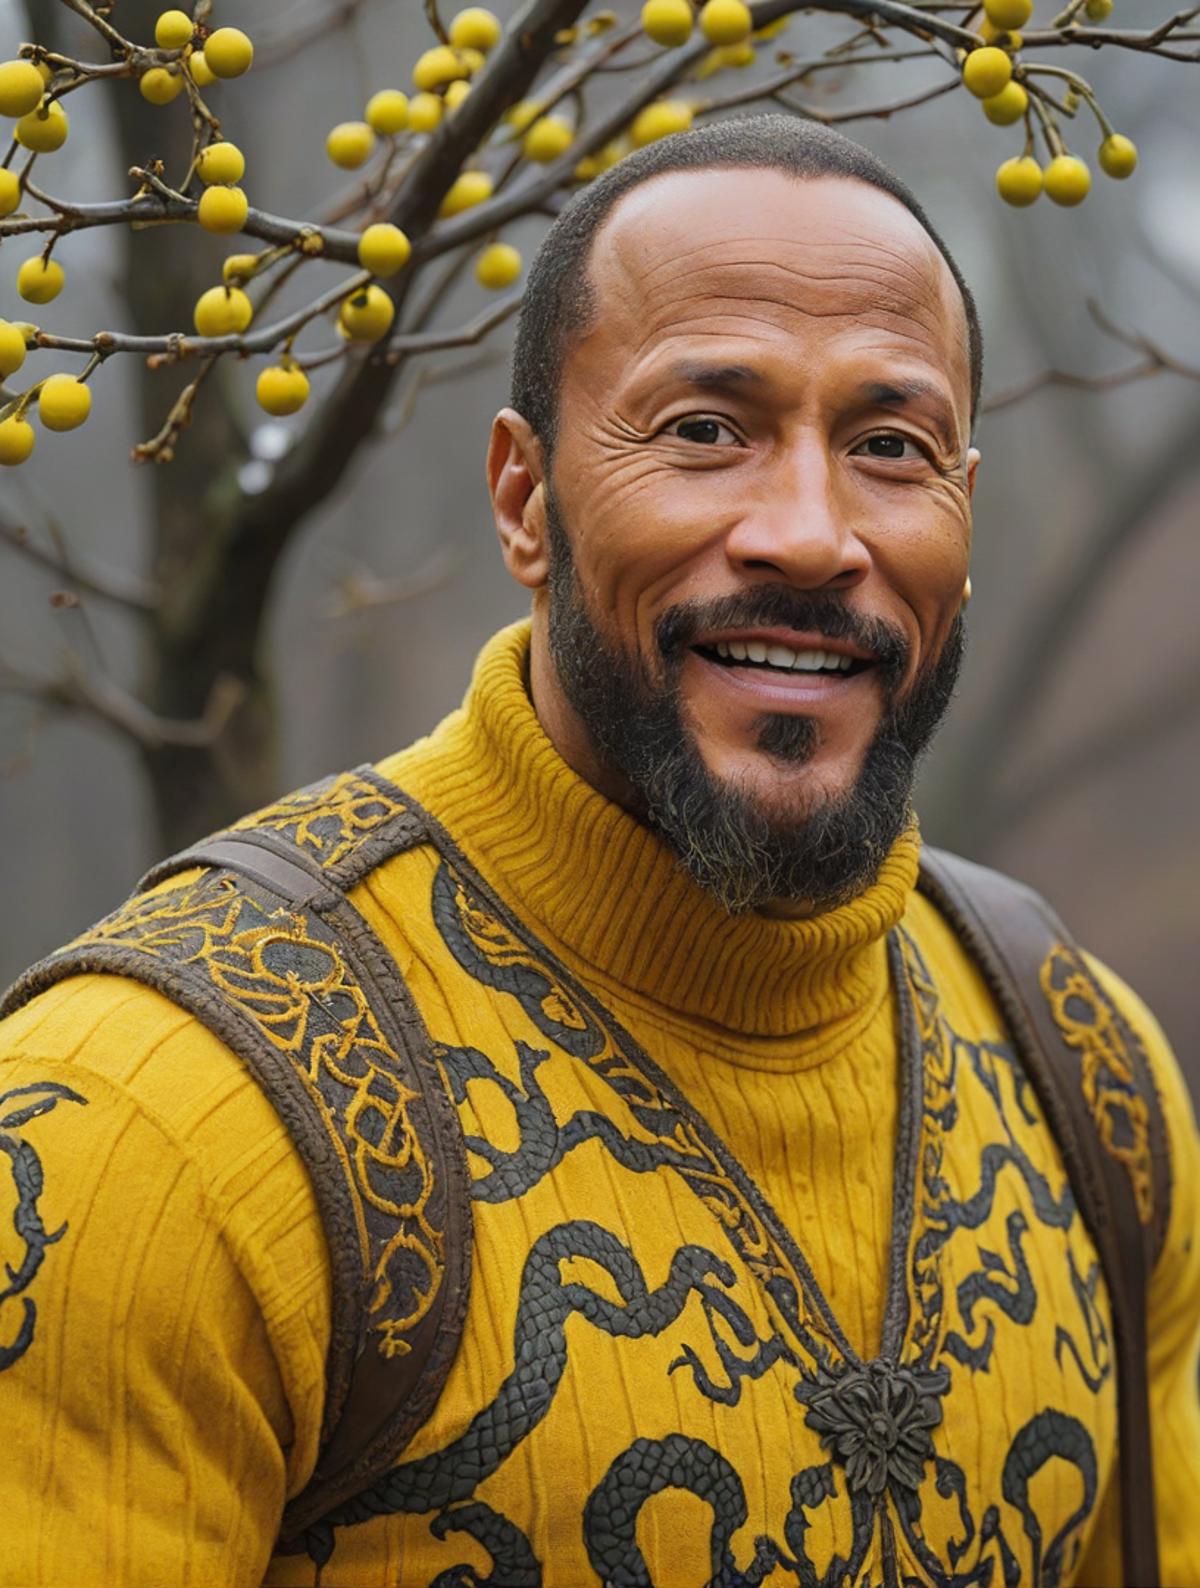 A smiling man wearing a yellow sweater and a backpack.